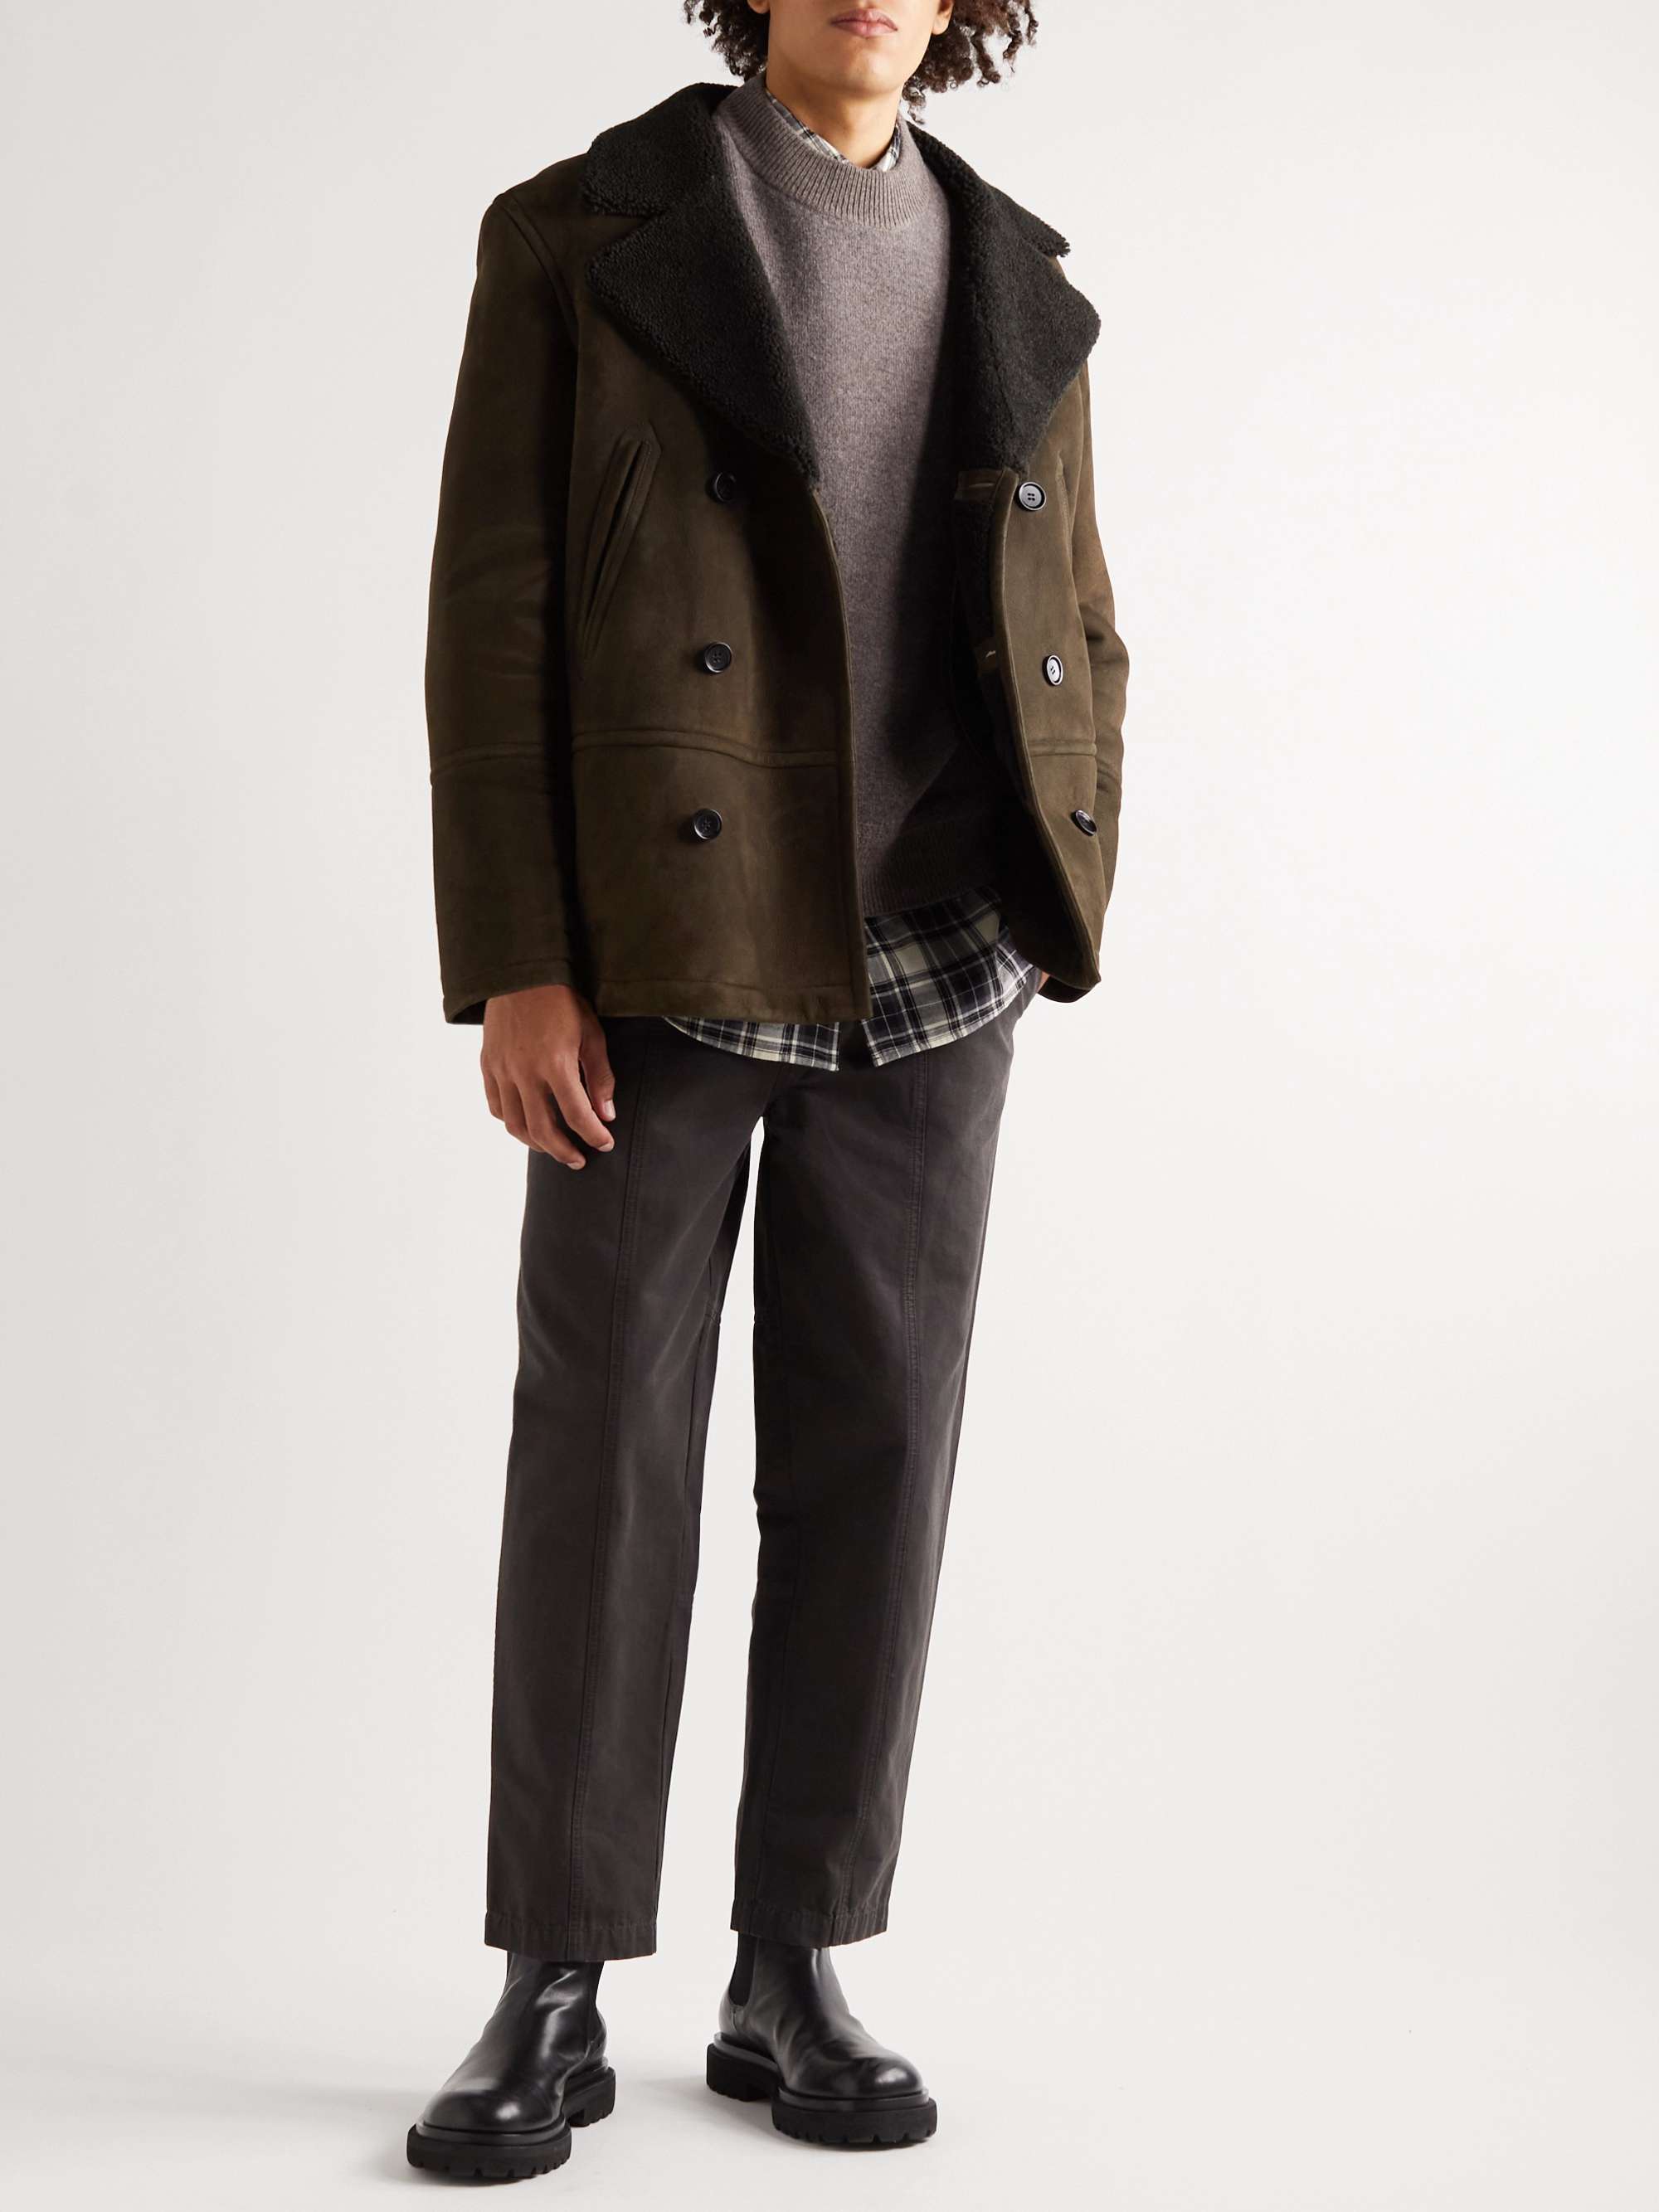 YVES SALOMON Double-Breasted Shearling-Lined Suede Peacoat